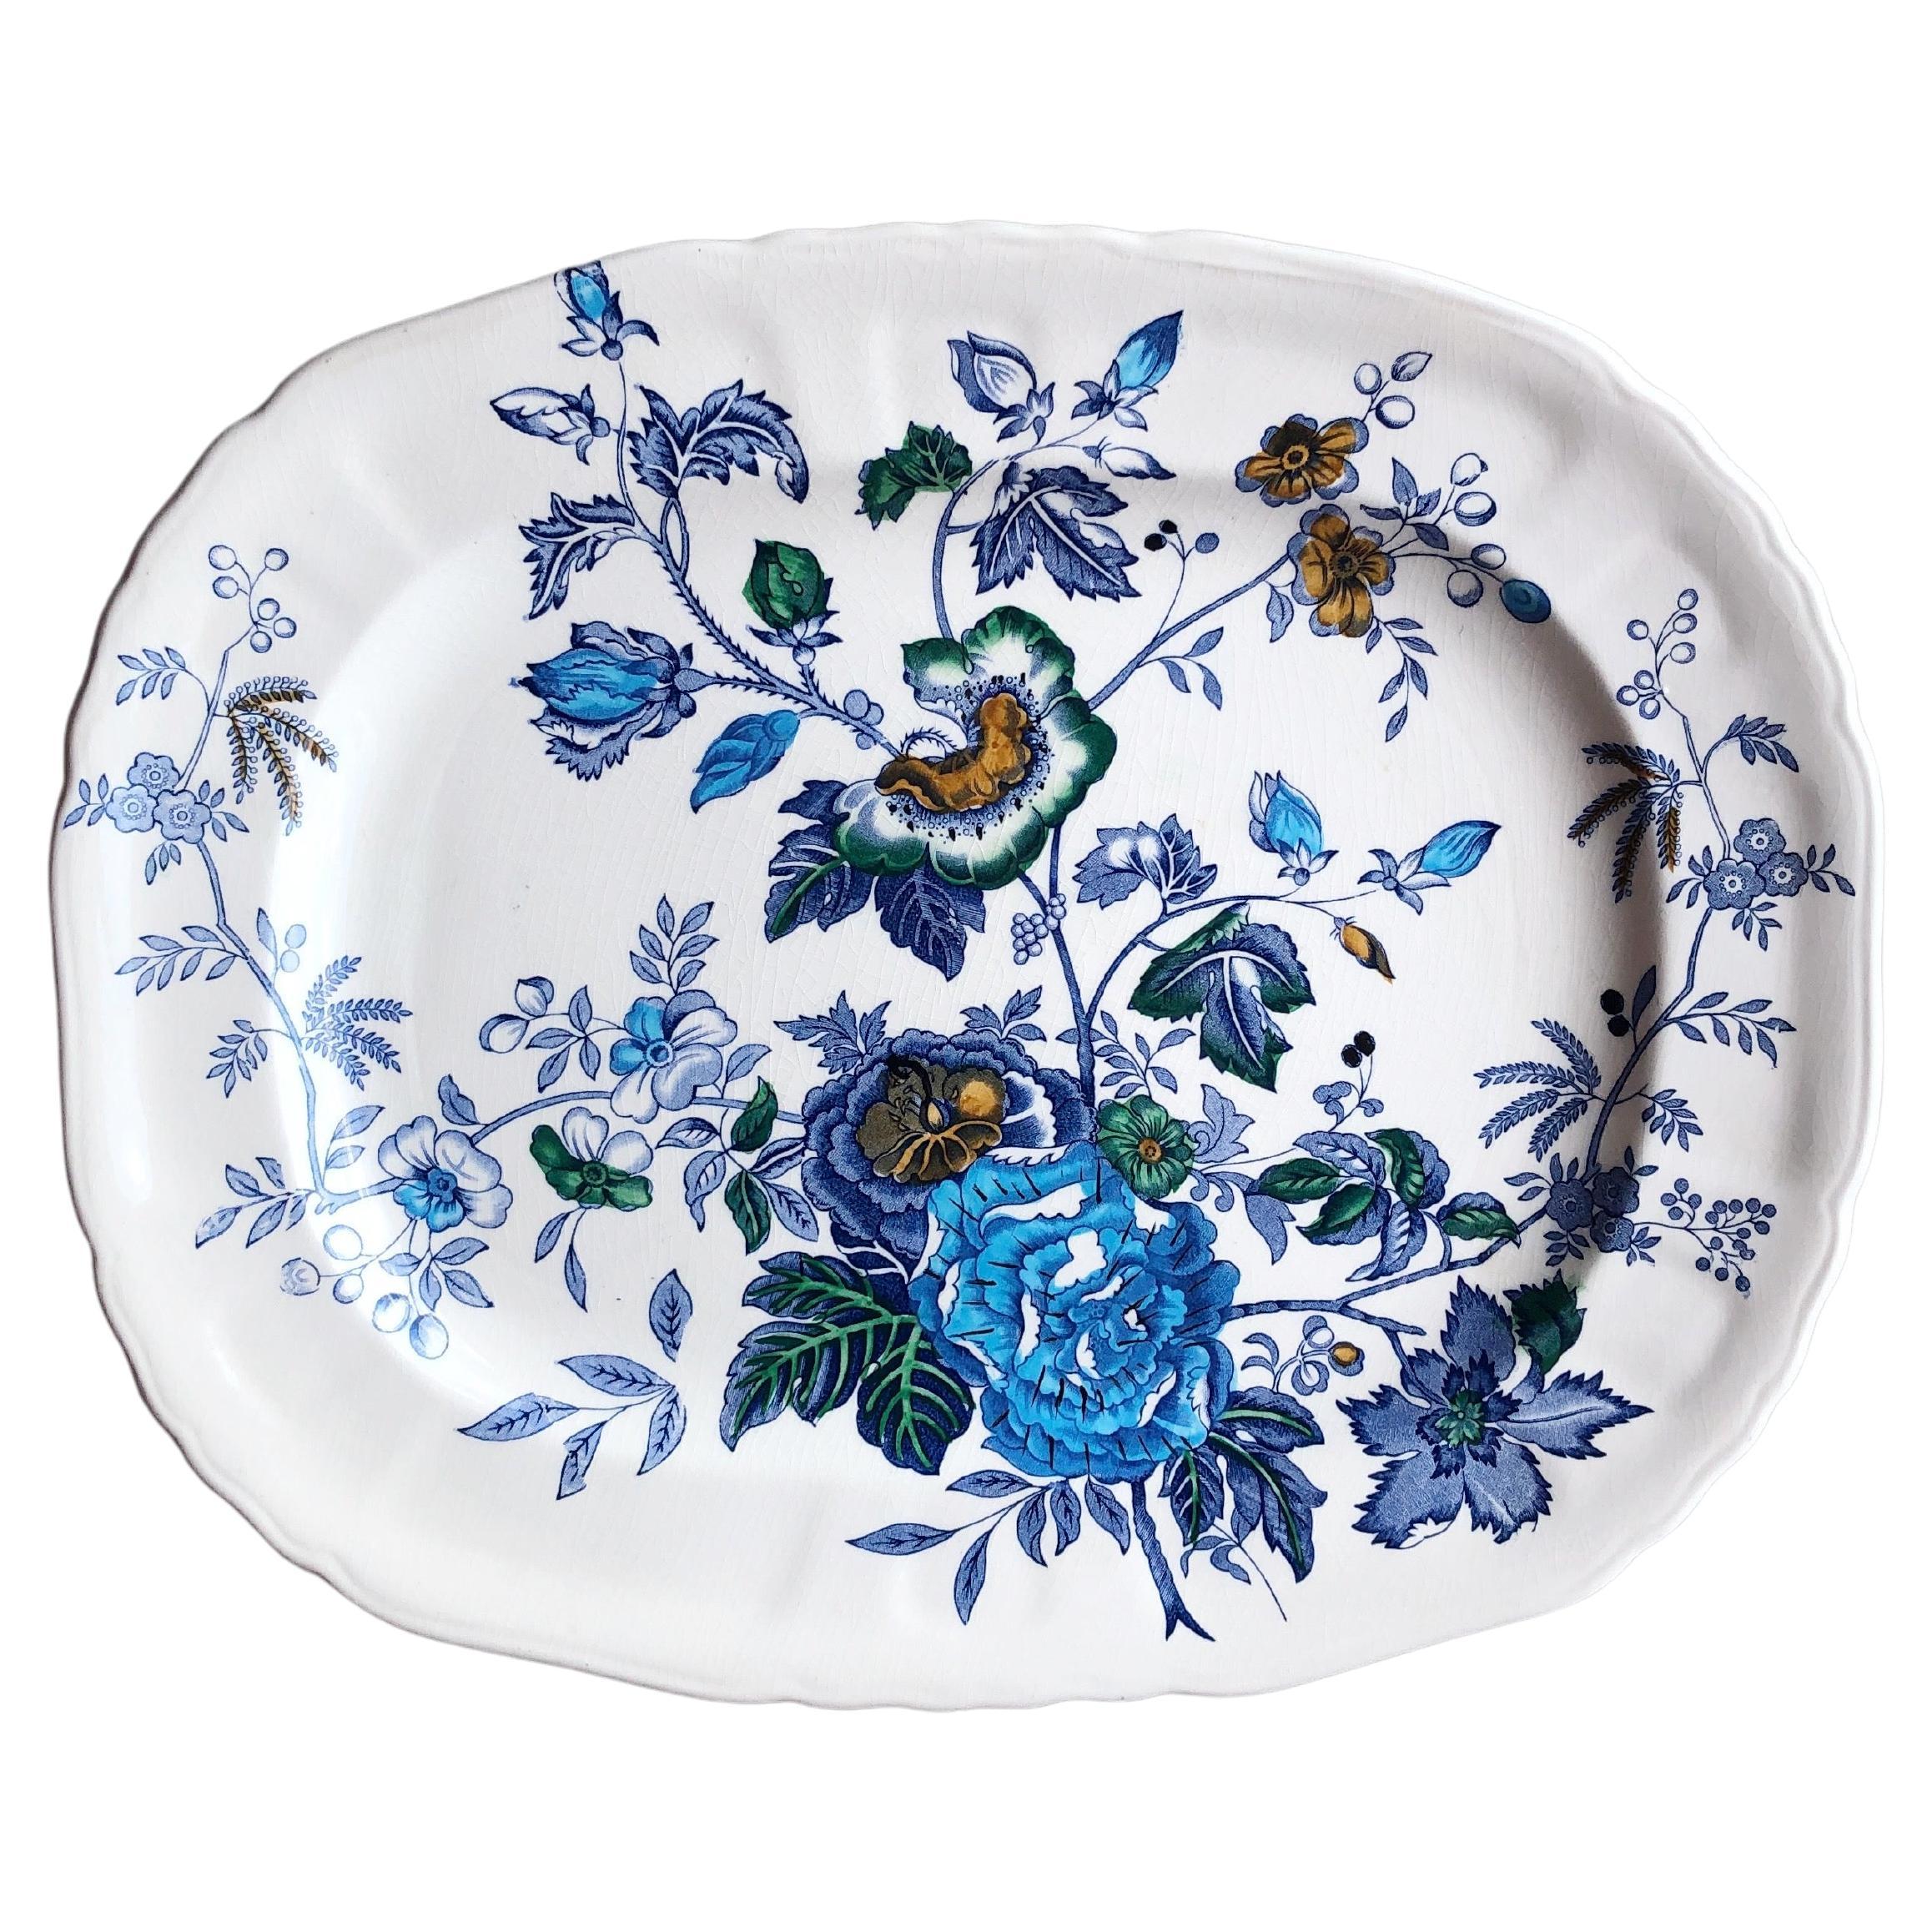 Ironstone Serveware, Ceramics, Silver and Glass - 277 For Sale at 1stDibs